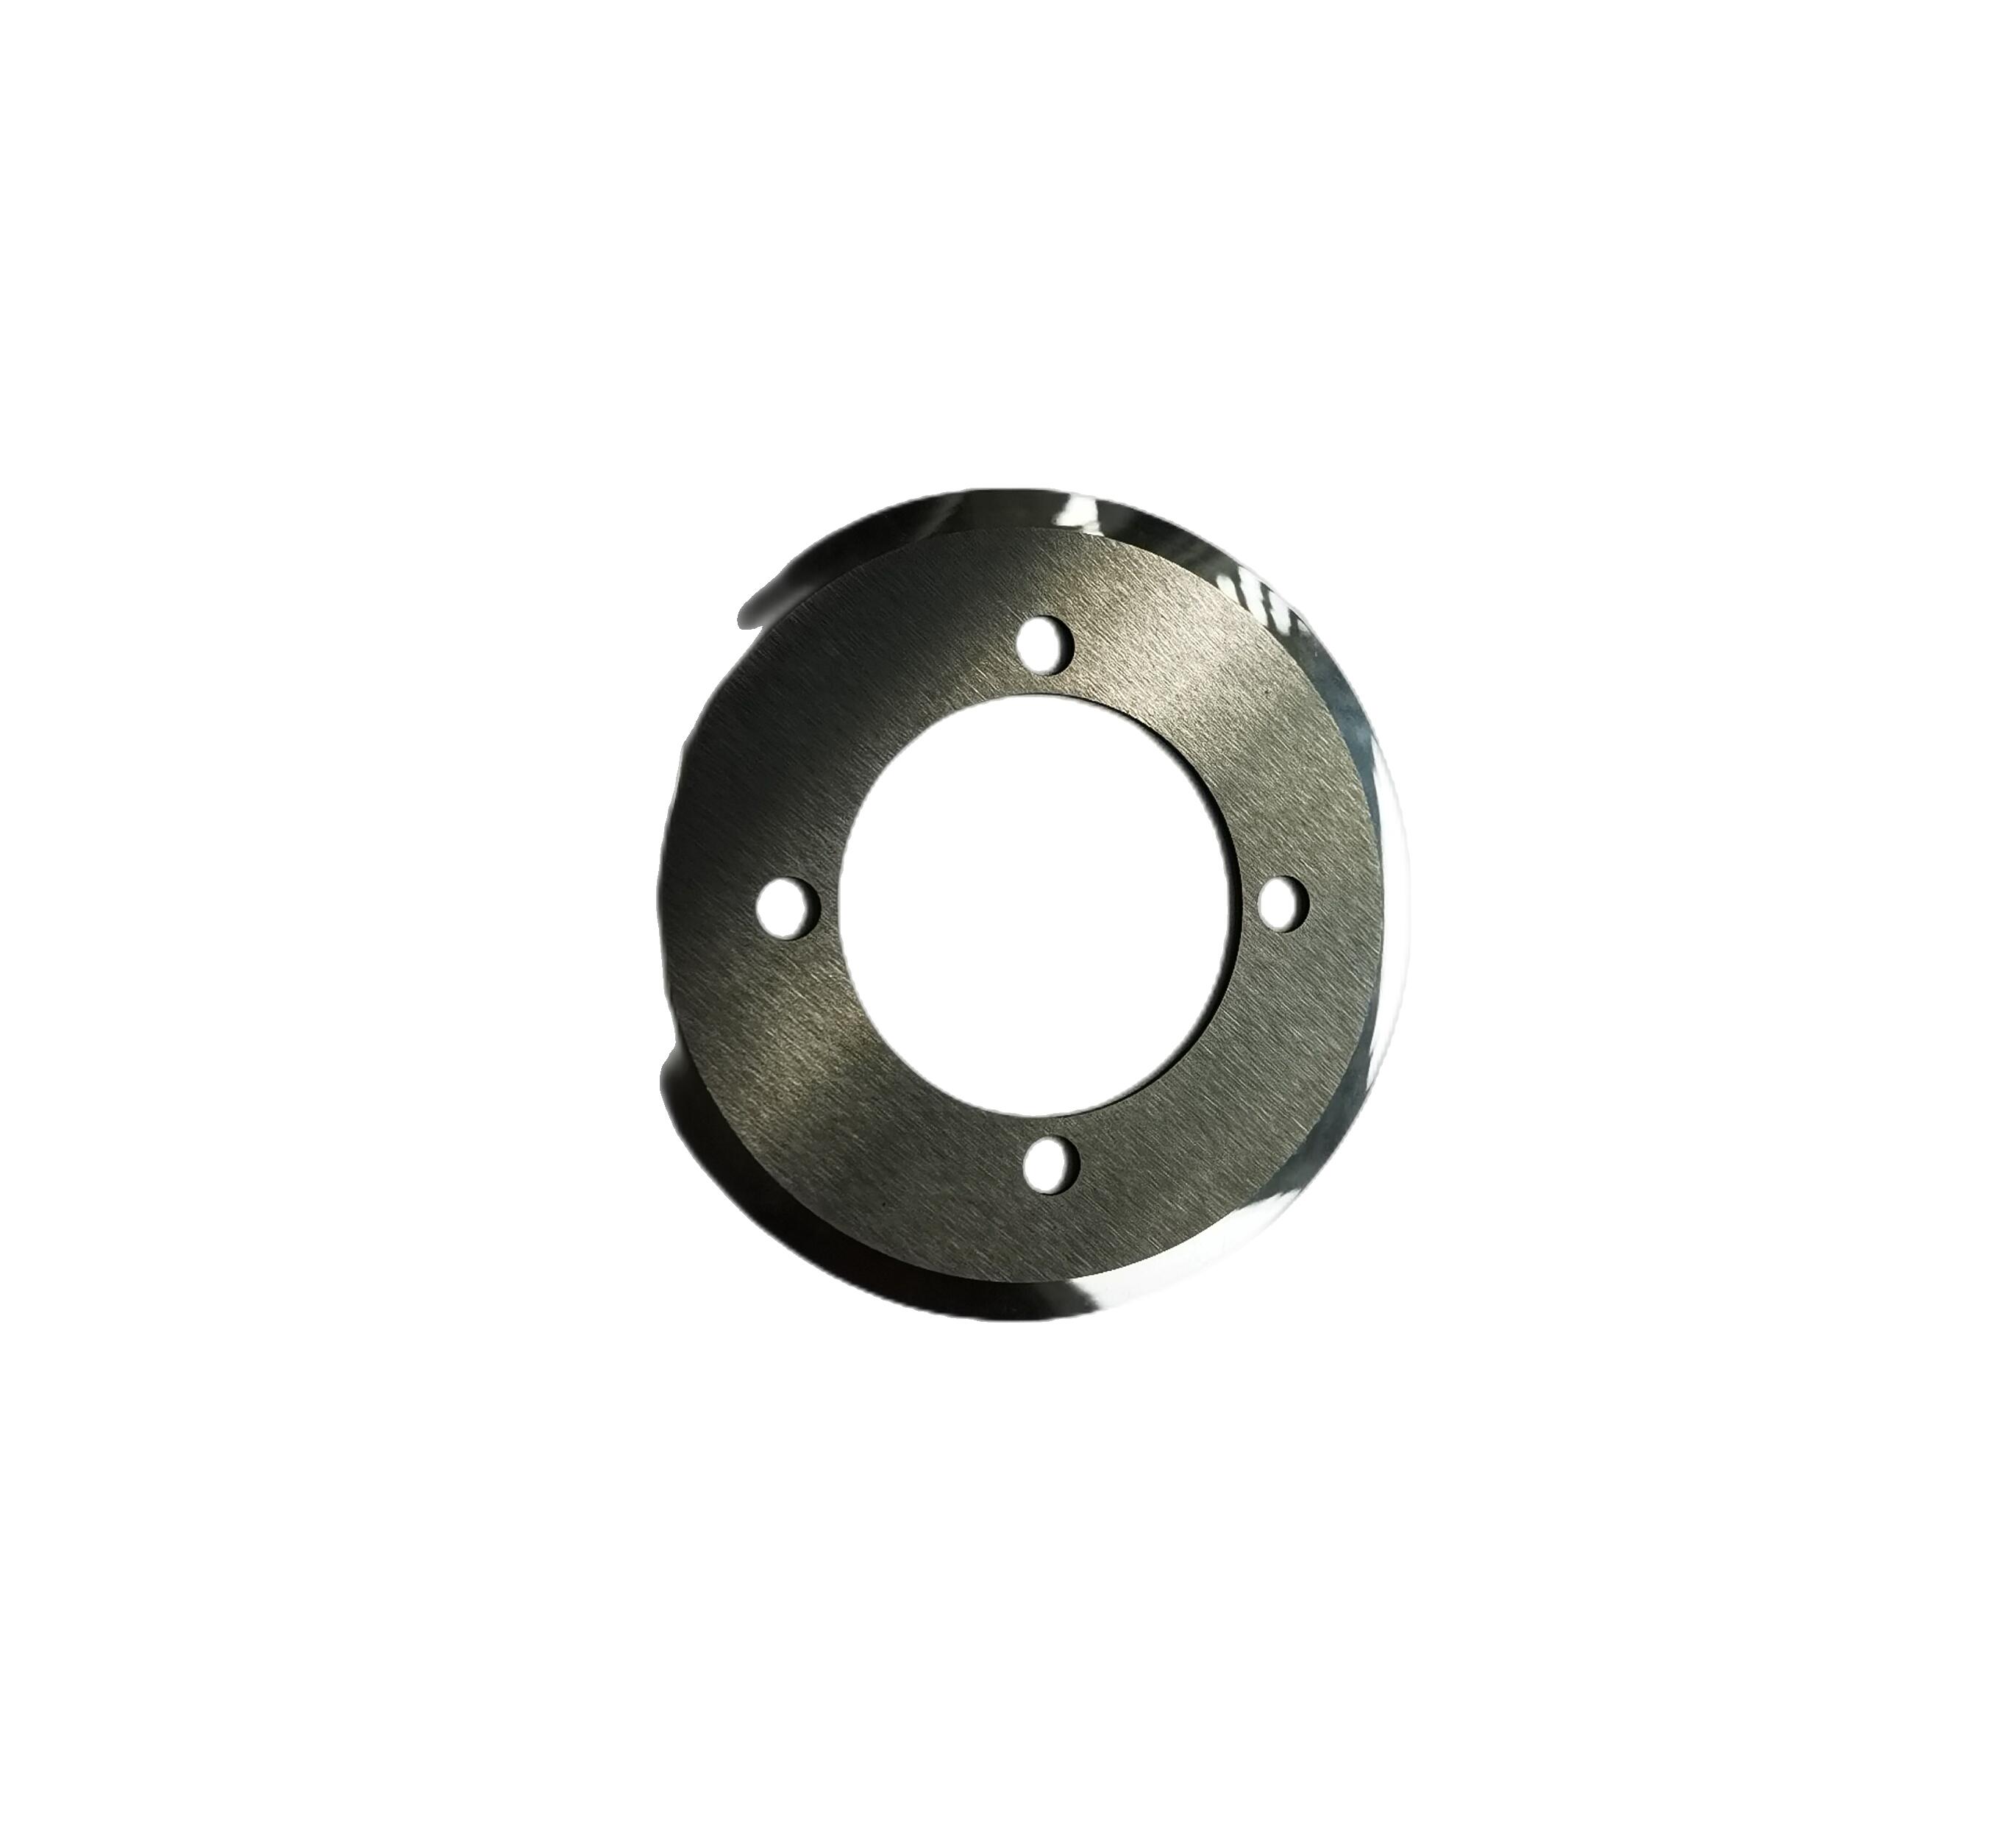 MD380 Stainless Steel Round Blade Roundable For MDcare MD380 Autocutter